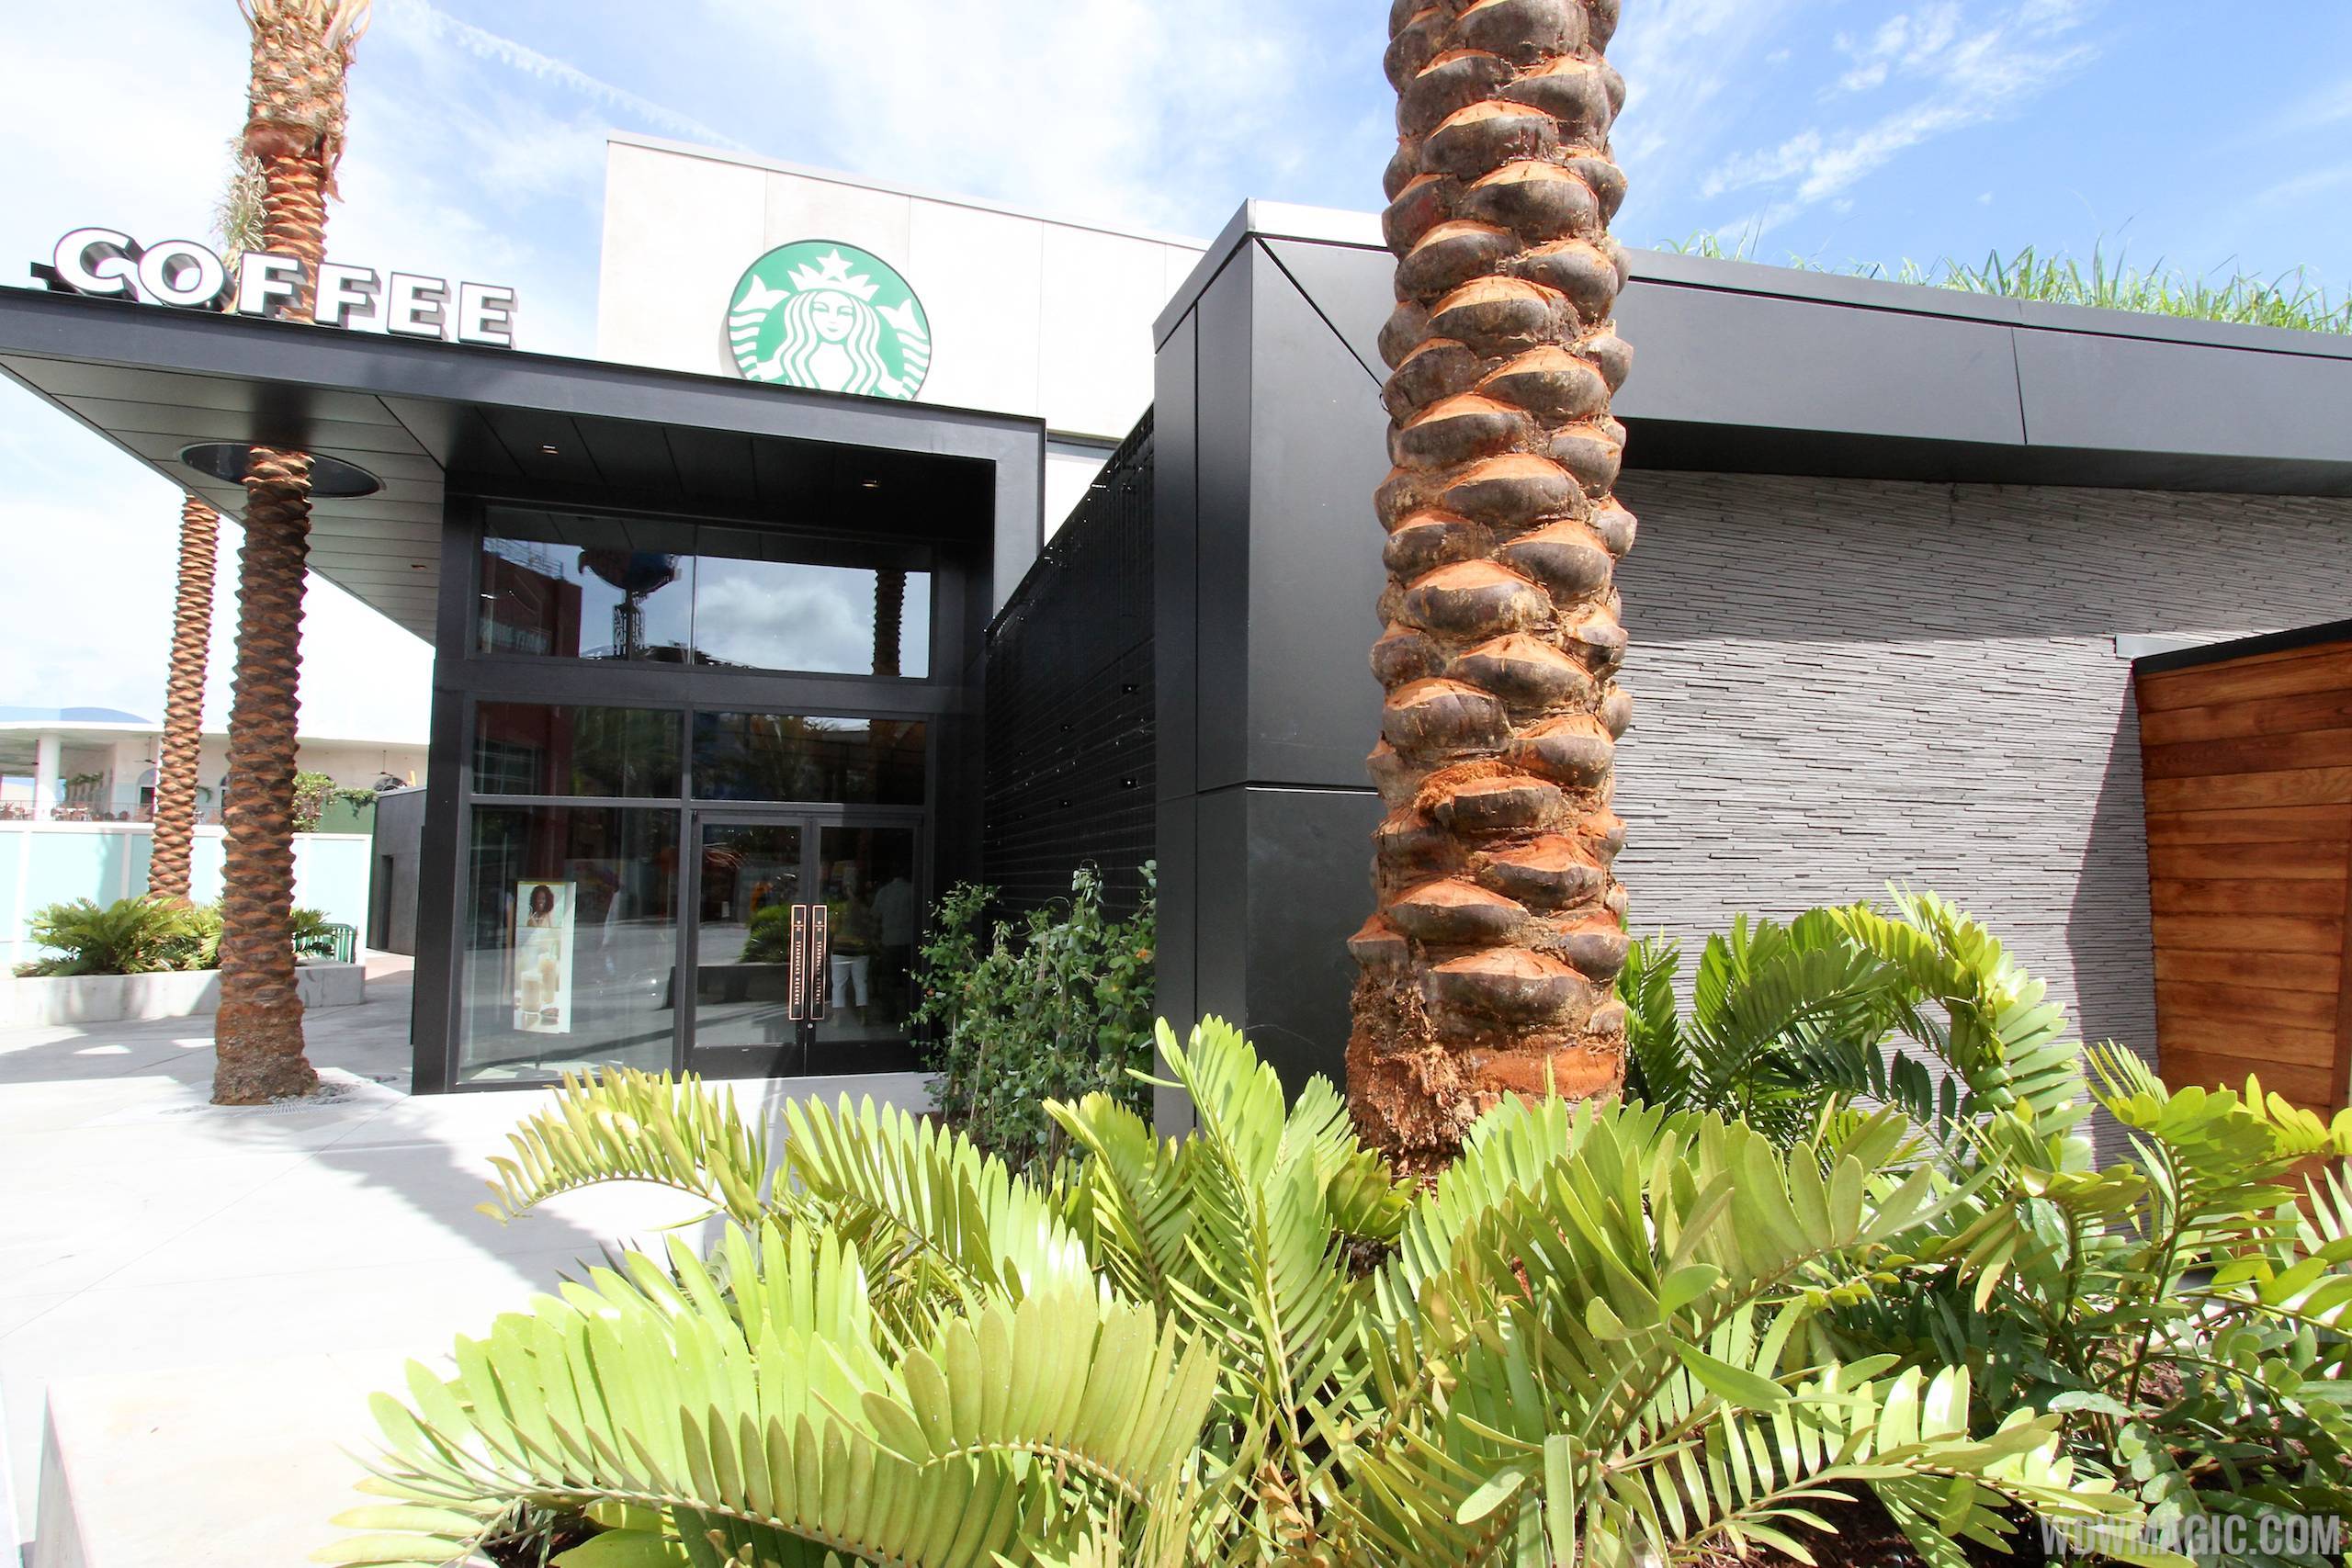 Starbucks West Side opening day - inside and out